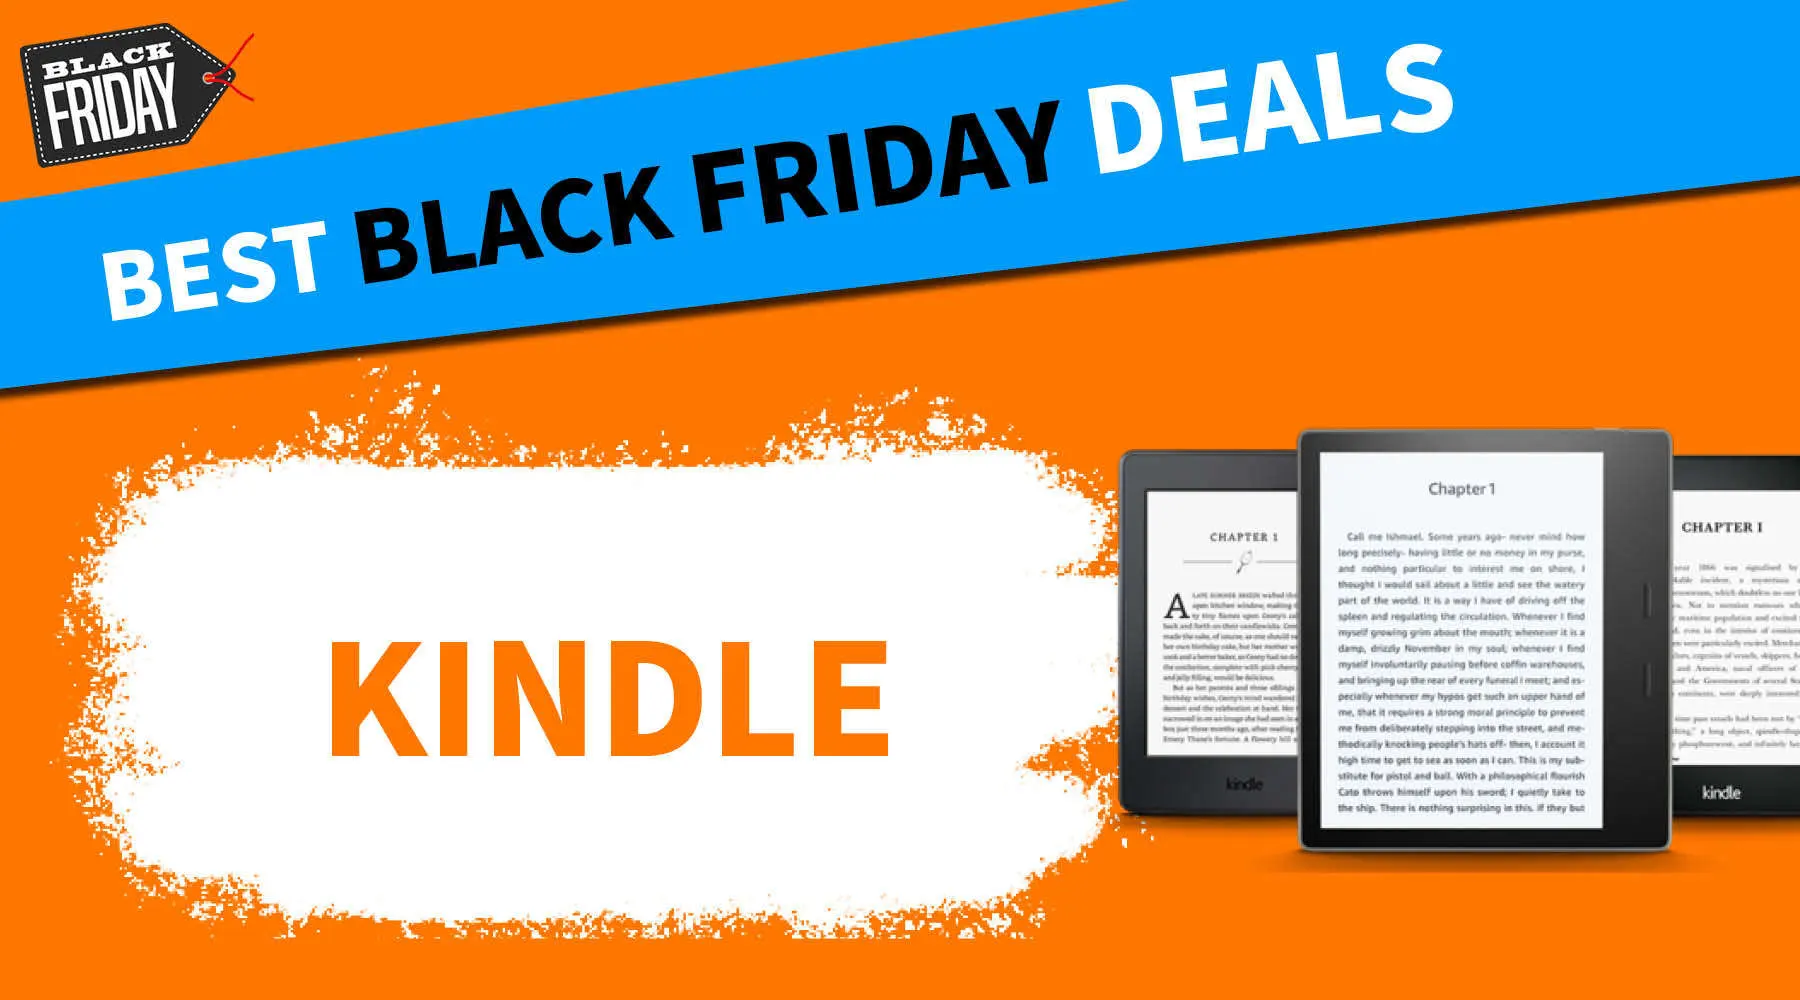 Best Kindle Black Friday Australia deals: Up to 25% off | Finder - What Kindle Books Will Be On Sale Black Friday